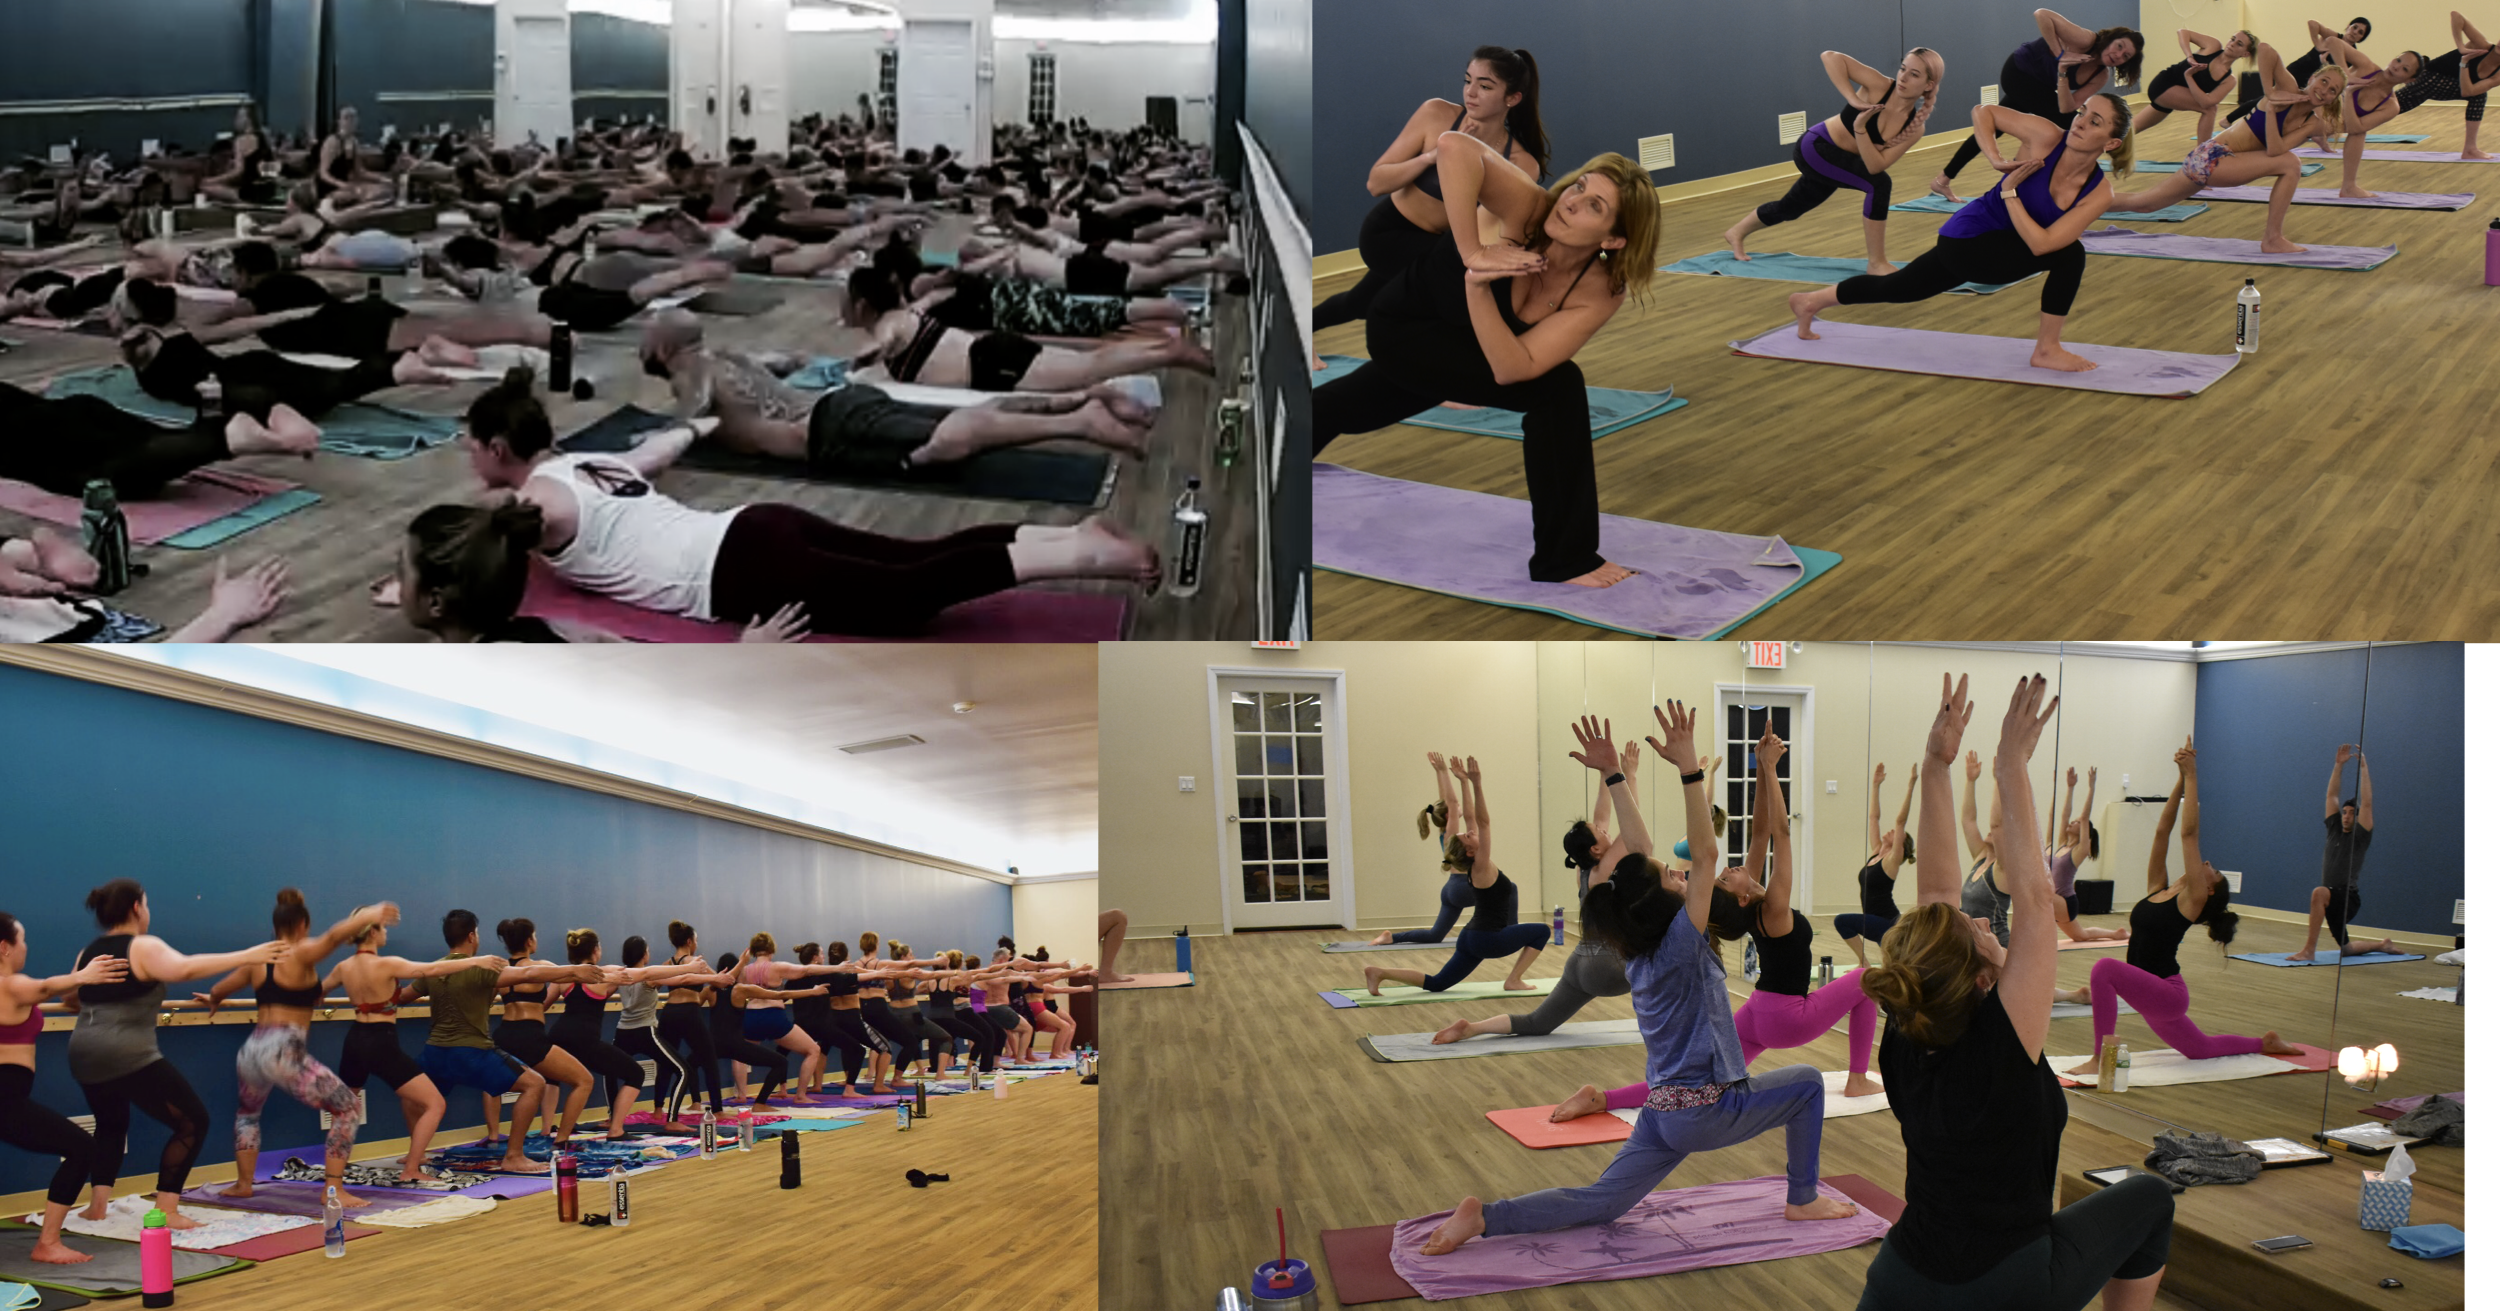   Our Classes   Hot Yoga! Hot Pilates! Hot Barre!   Learn More  